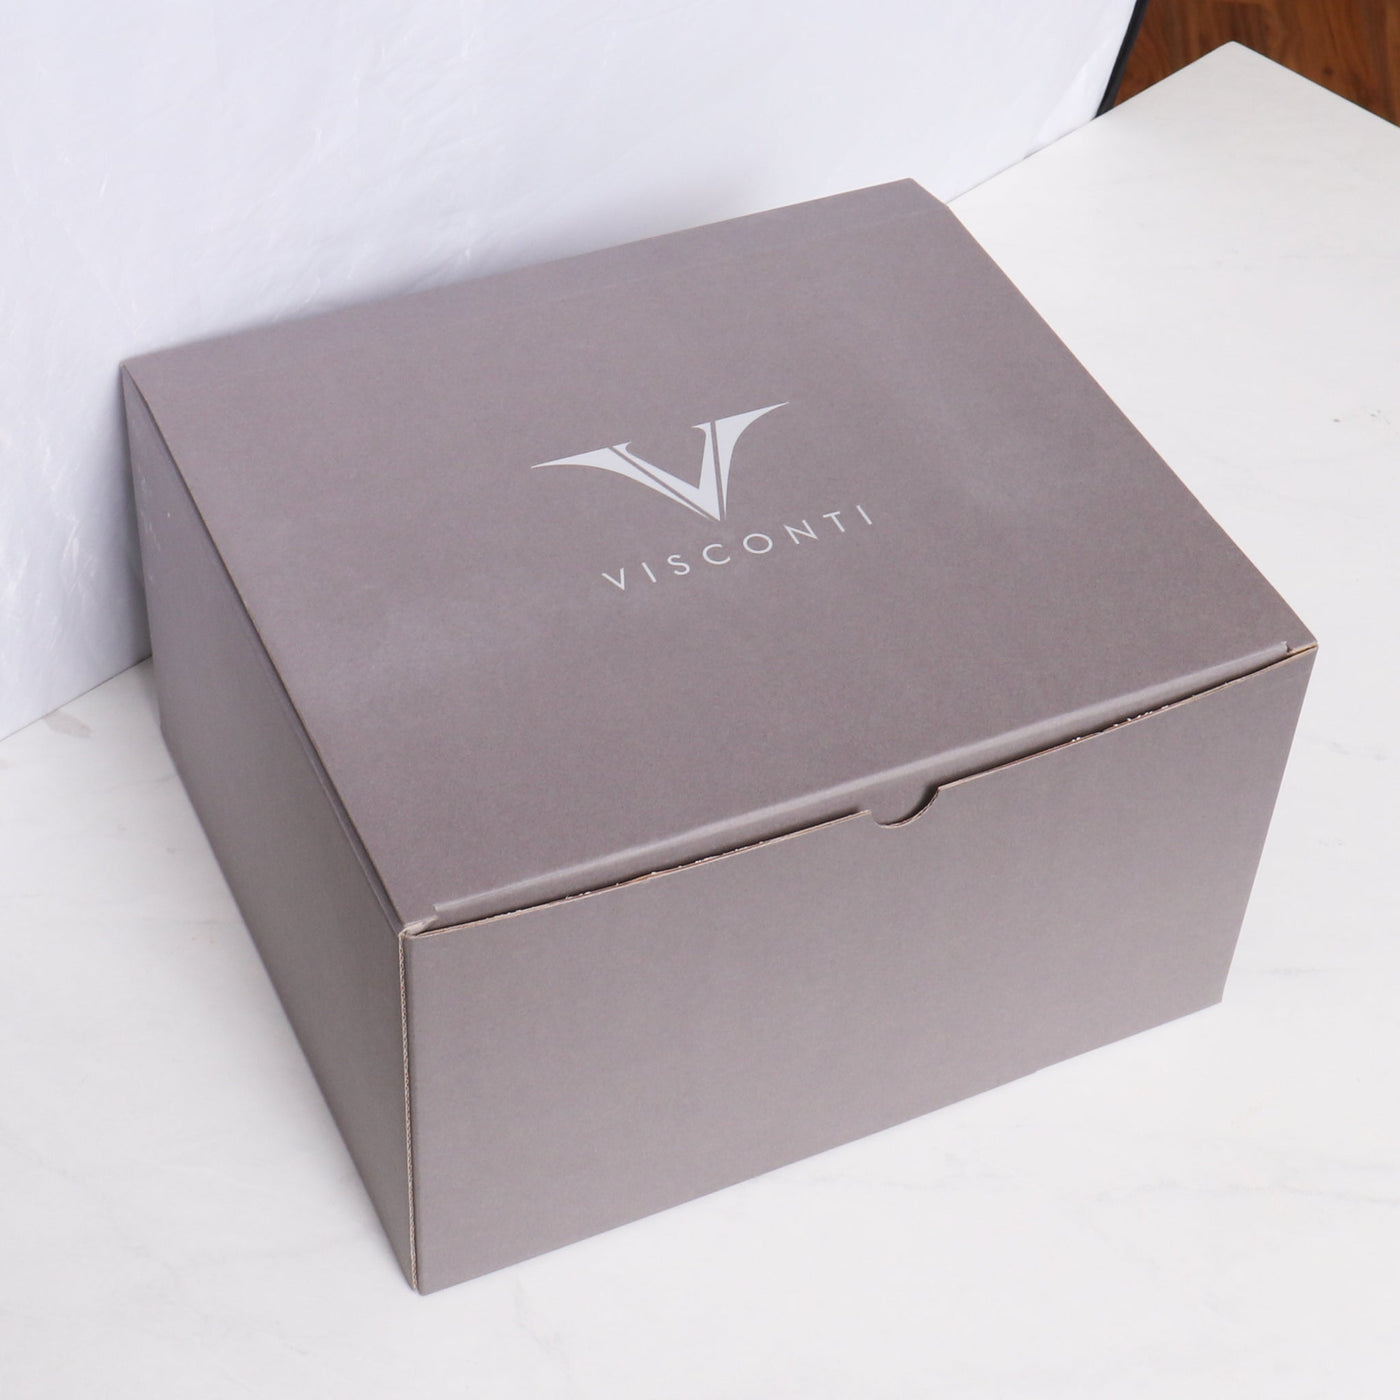 Visconti Alexander the Great Limited Edition Fountain Pen Box